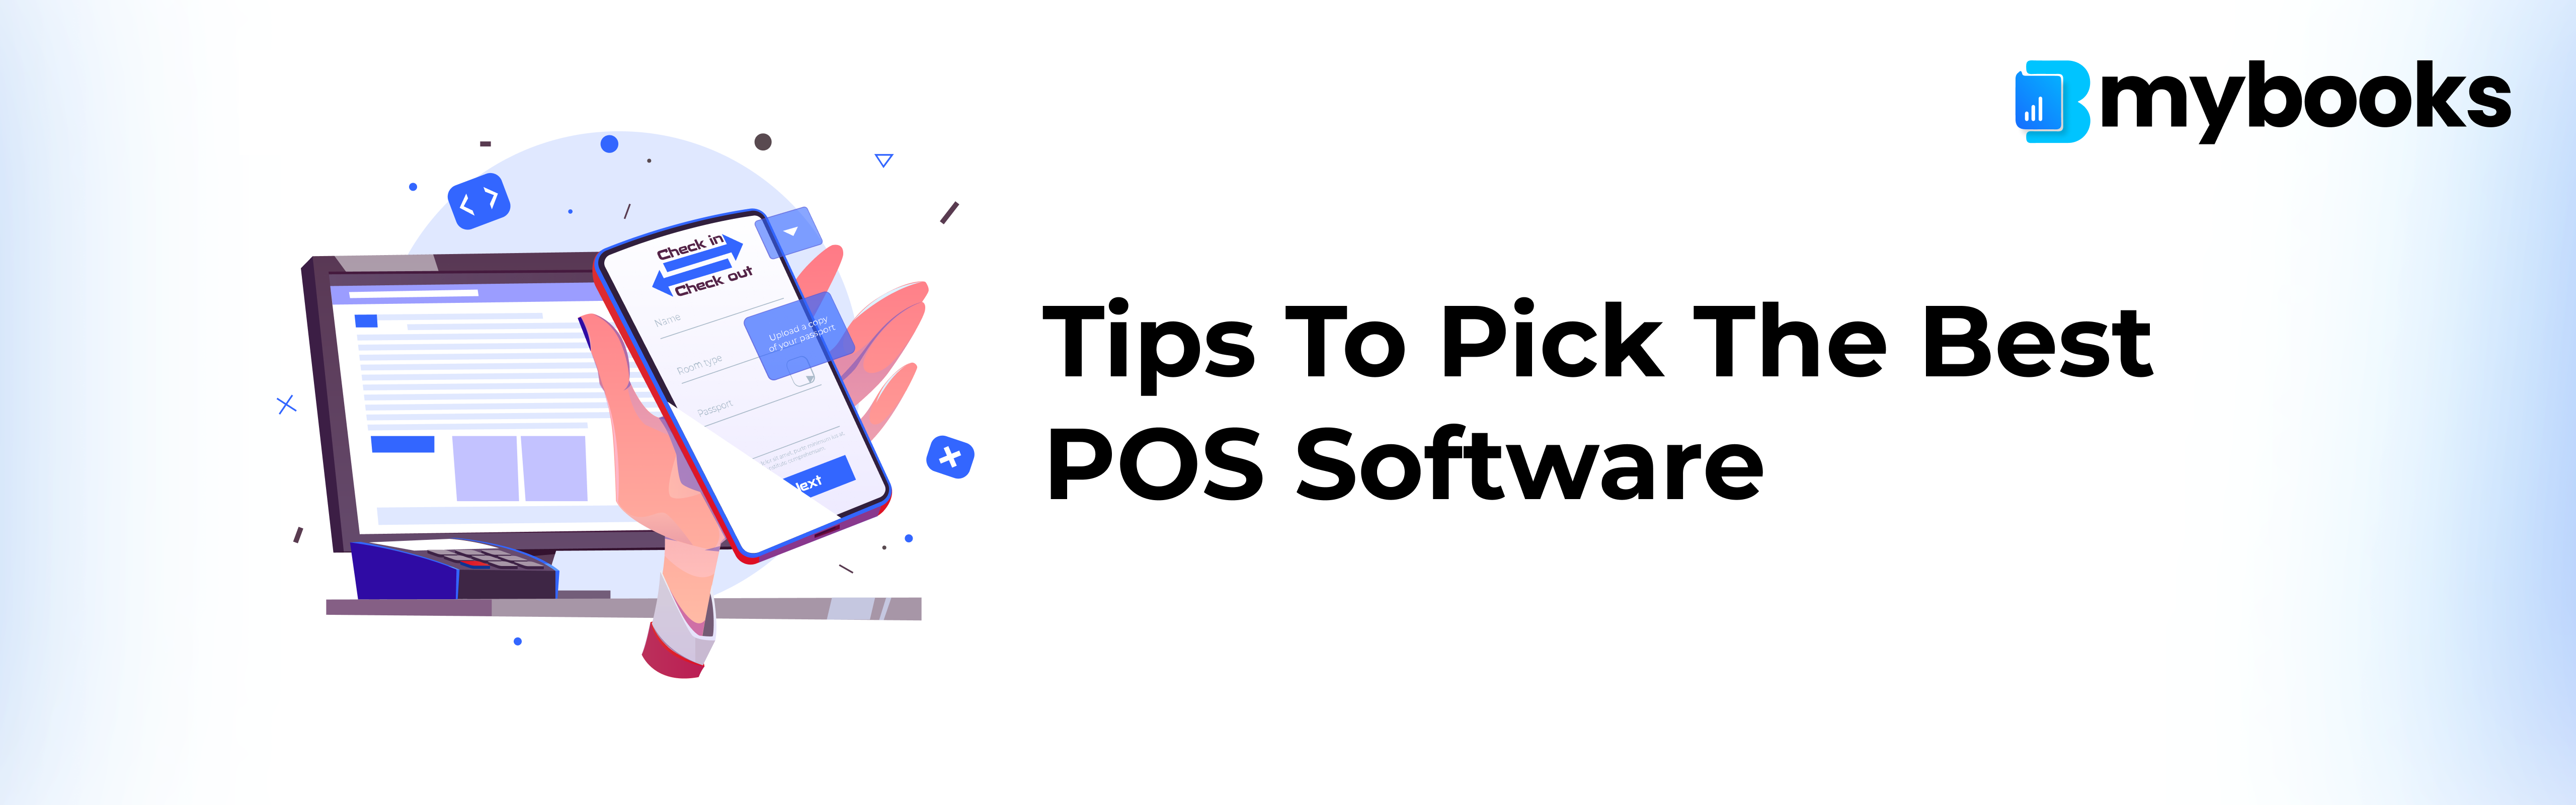 tips-to-choose-the-right-pos-software